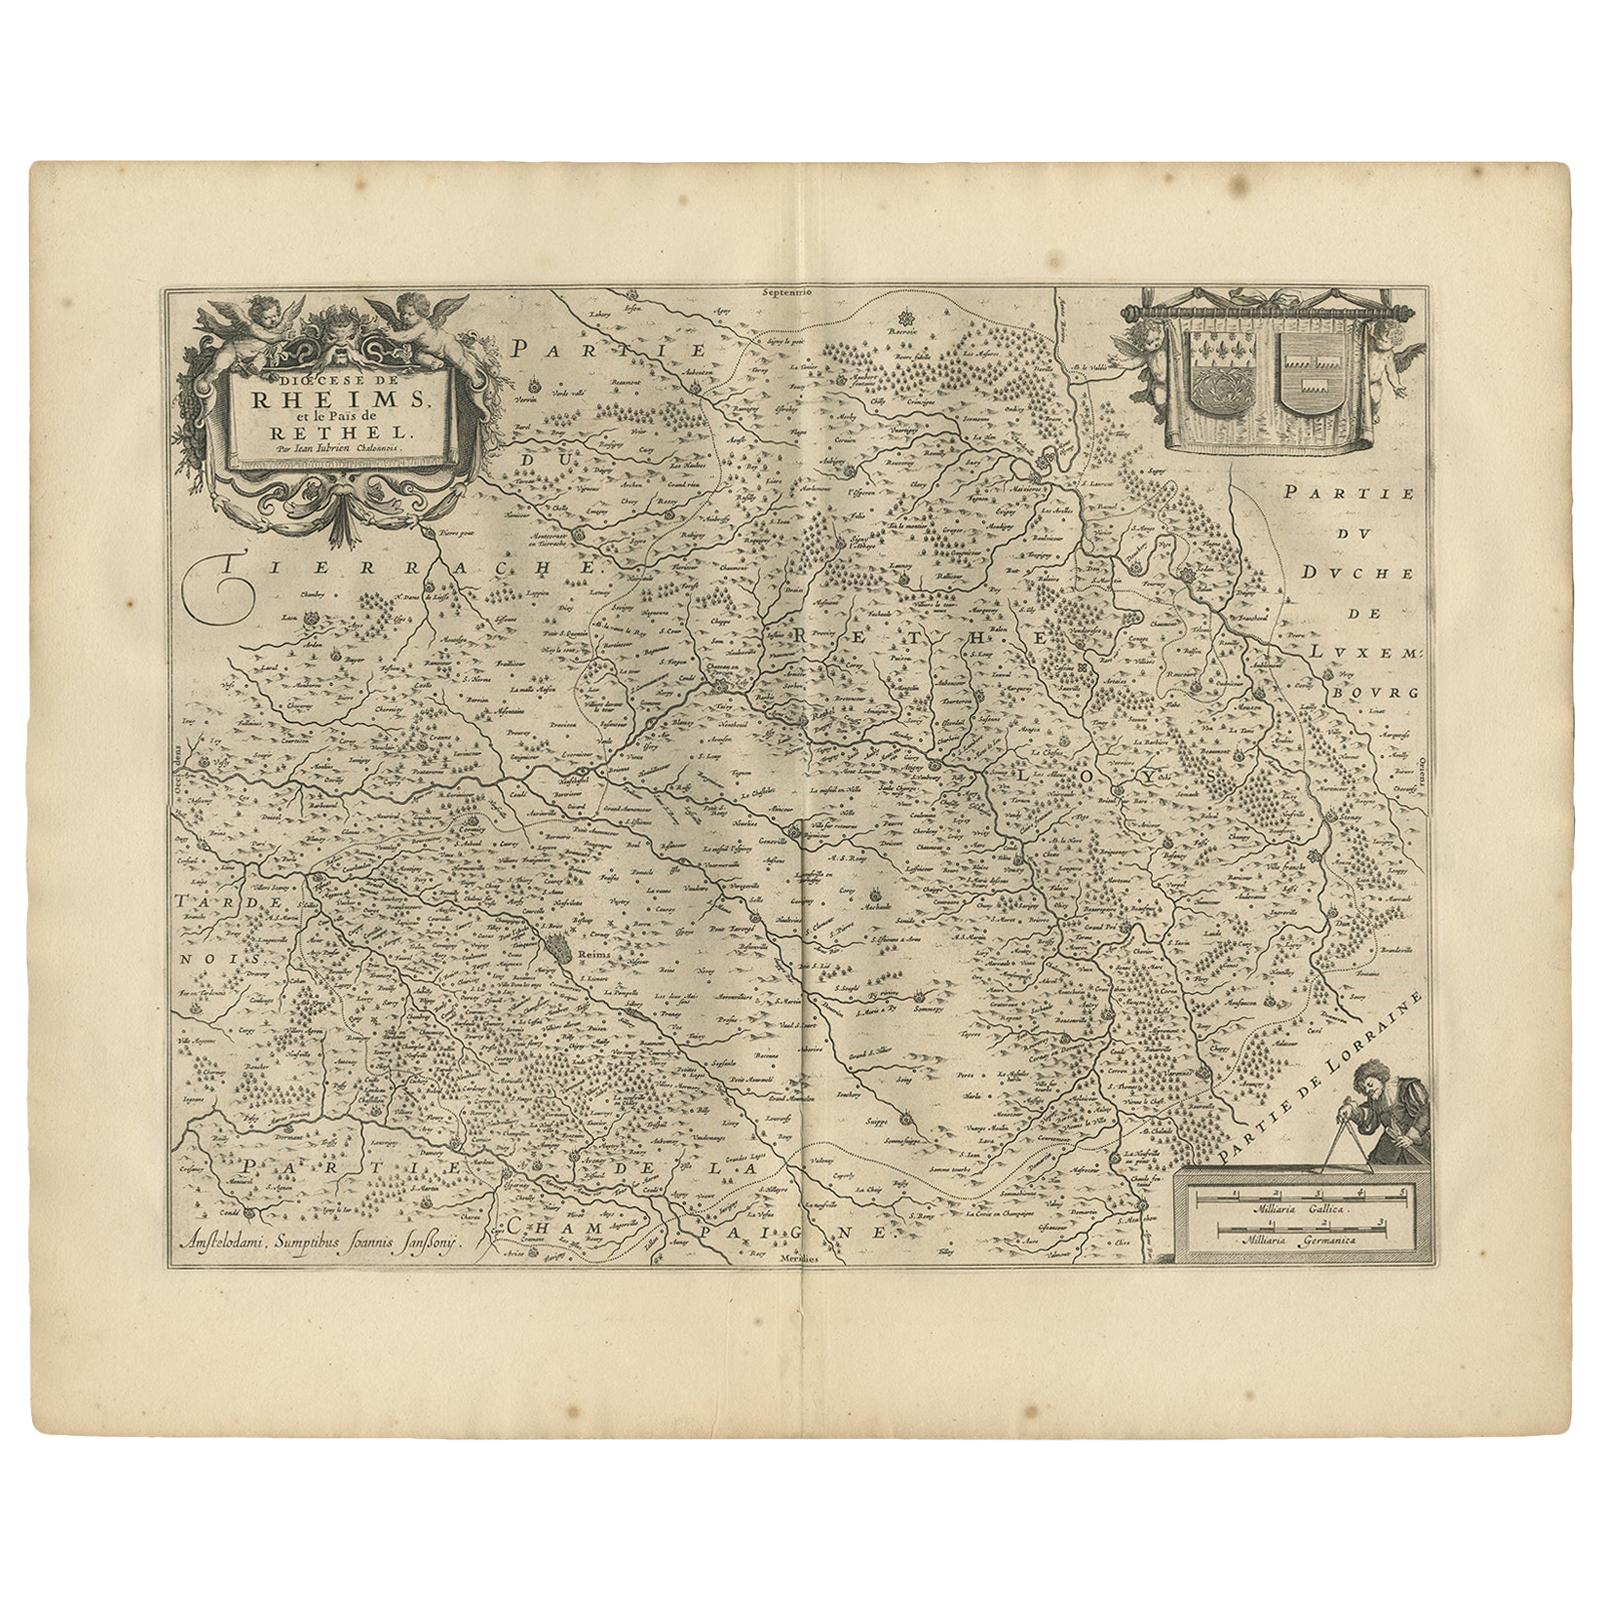 Antique Map of the Region of Rethelois by Janssonius, 1657 For Sale